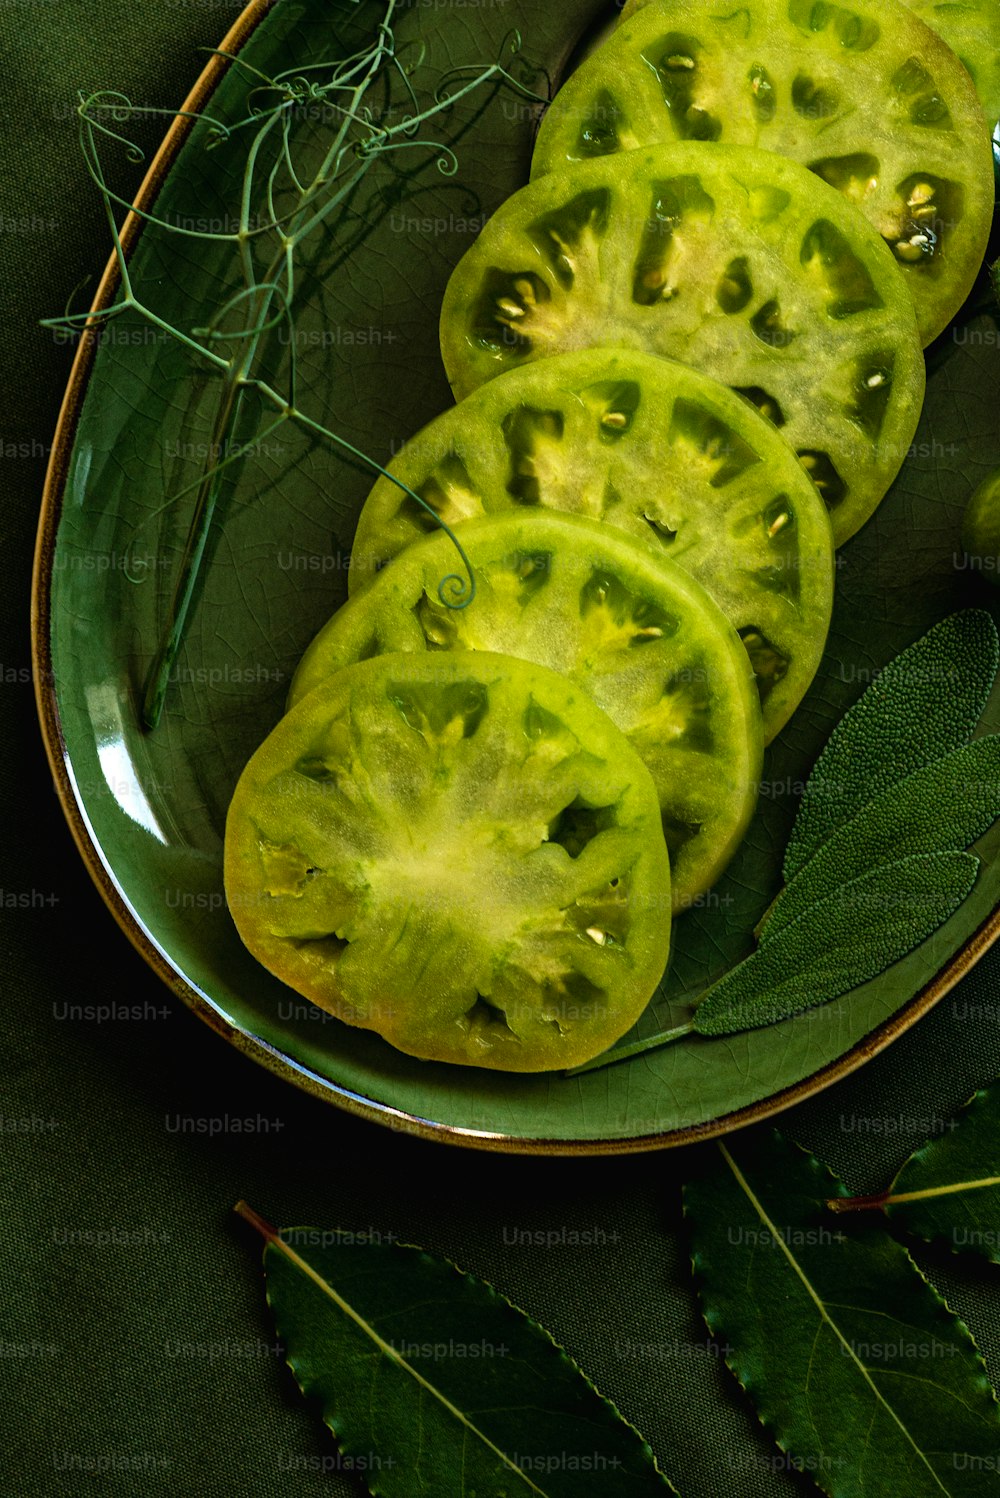 a plate of sliced green tomatoes with leaves